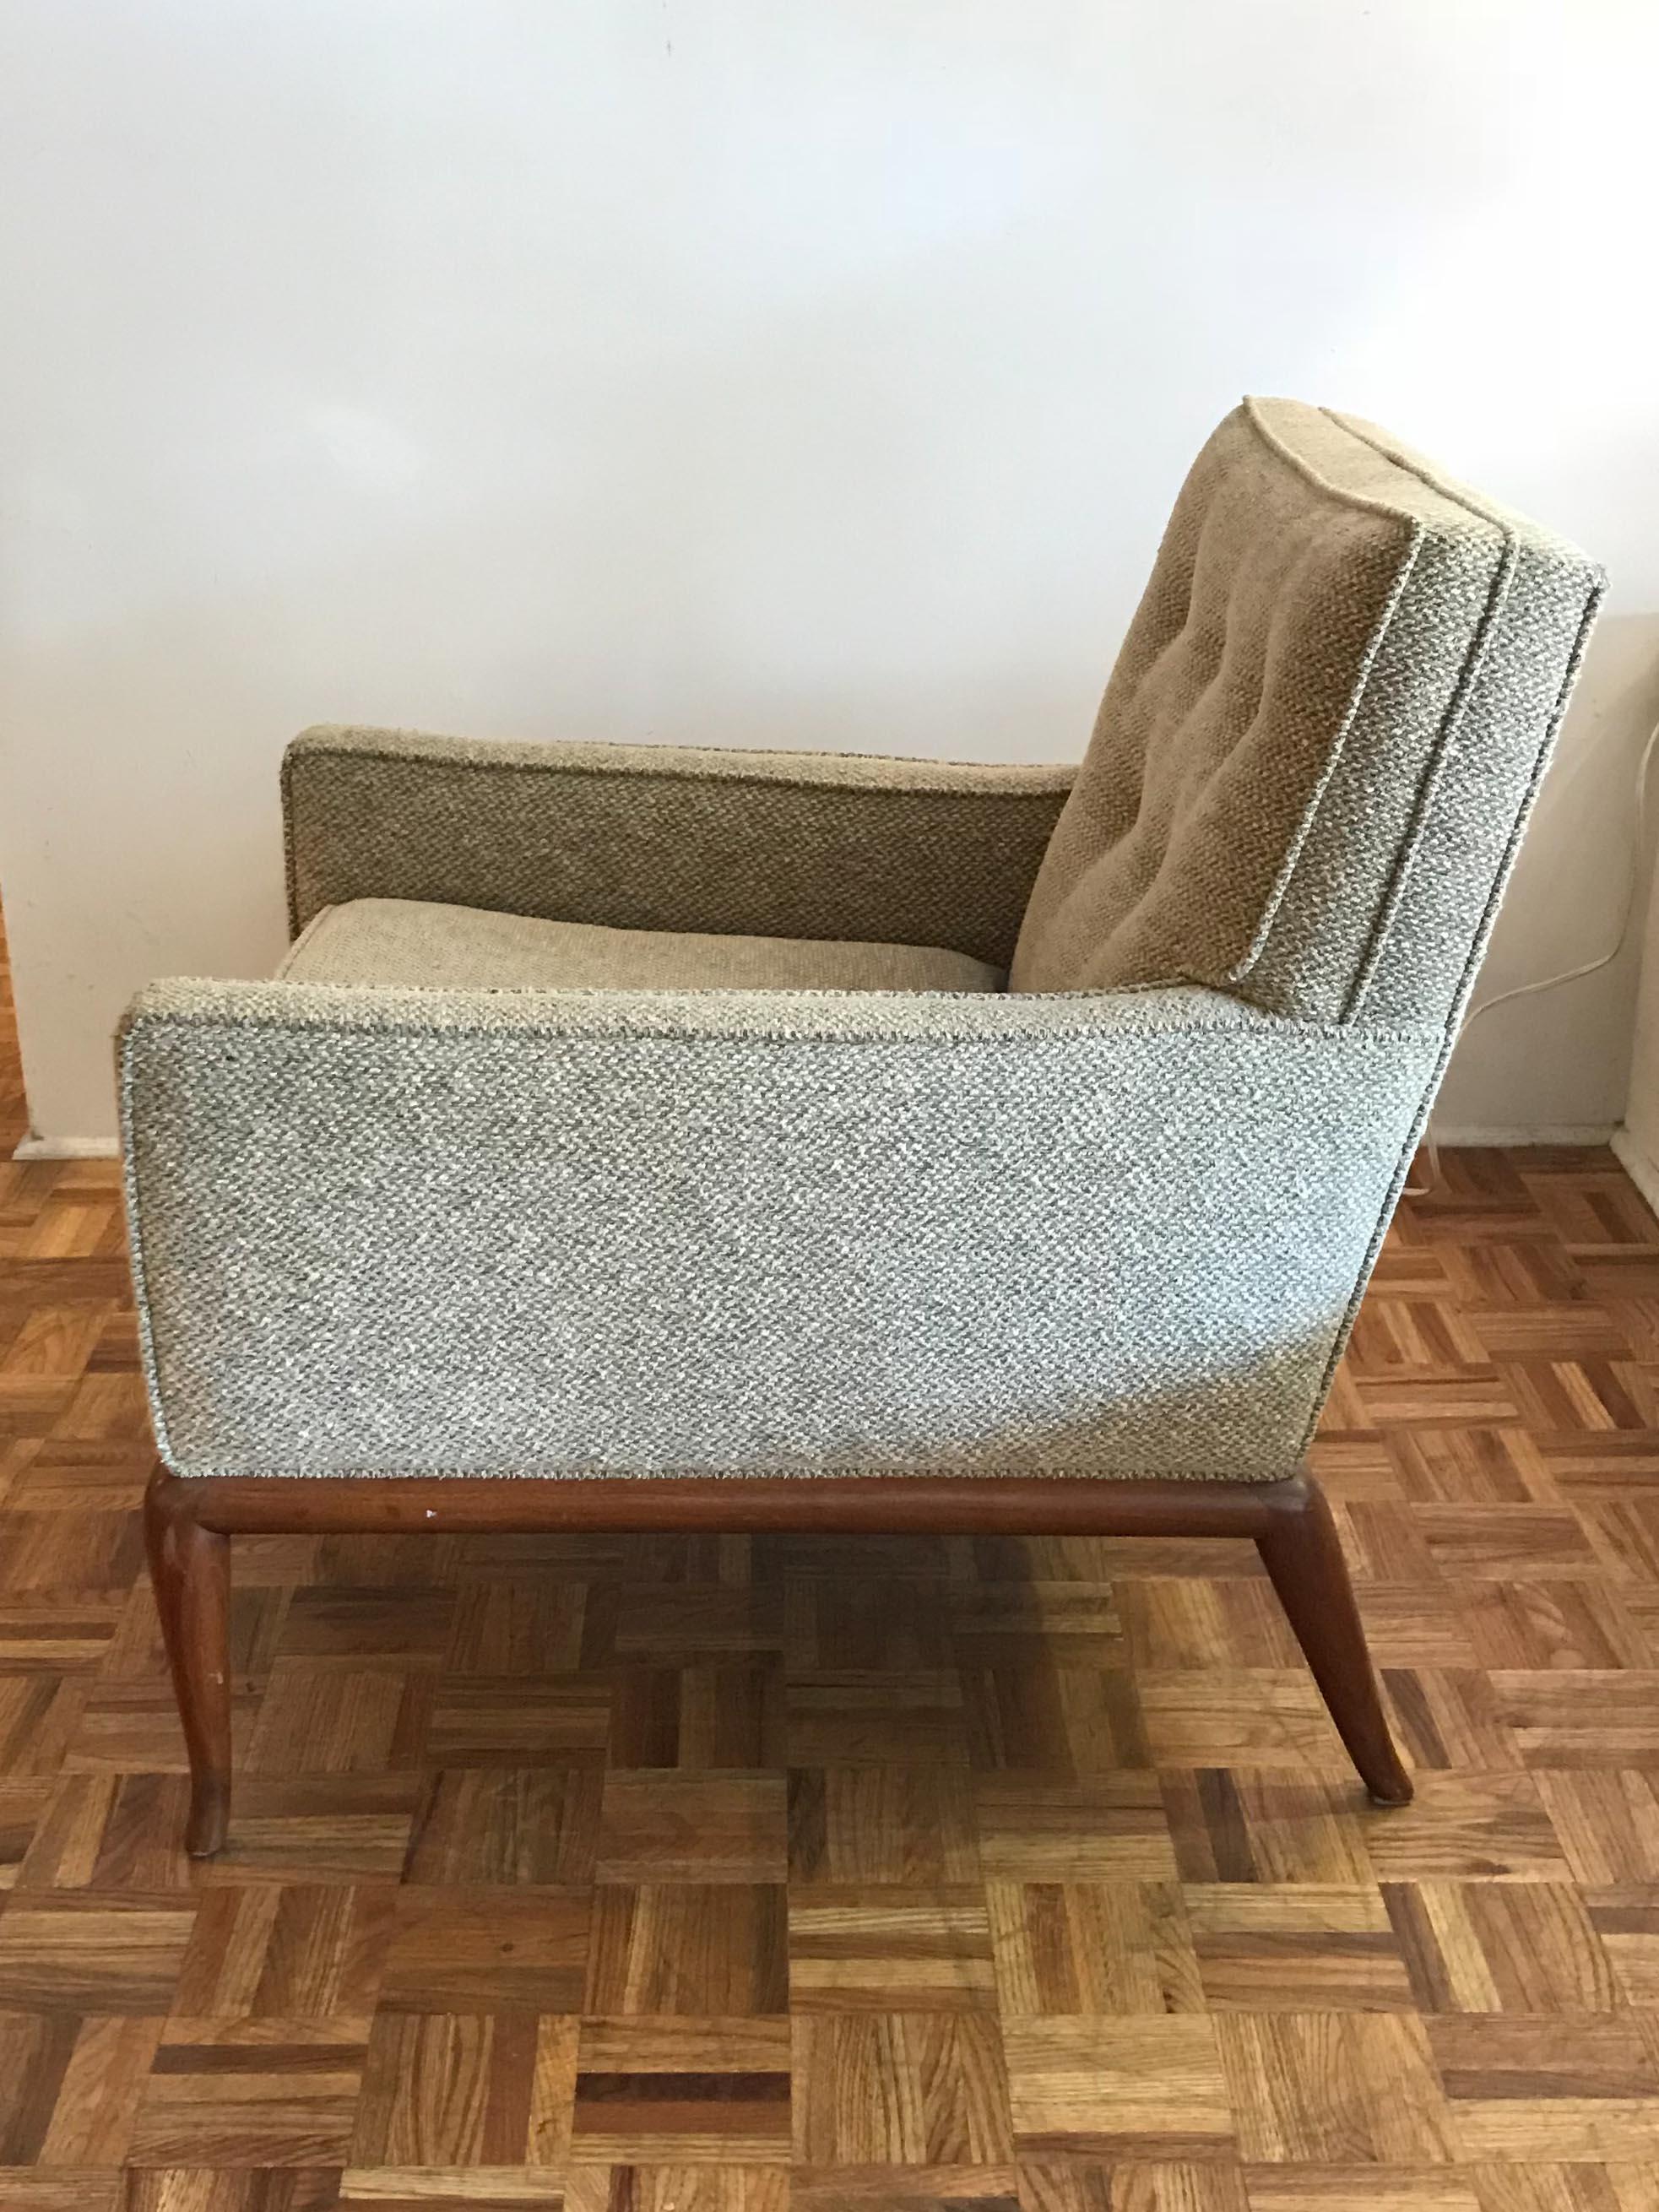 Pair of elegant T.H. Robsjohn-Gibbings for Widdicomb armchairs. Walnut frames with what looks to be original upholstery. Frames are in vintage condition with minor wear consistent with age and use.